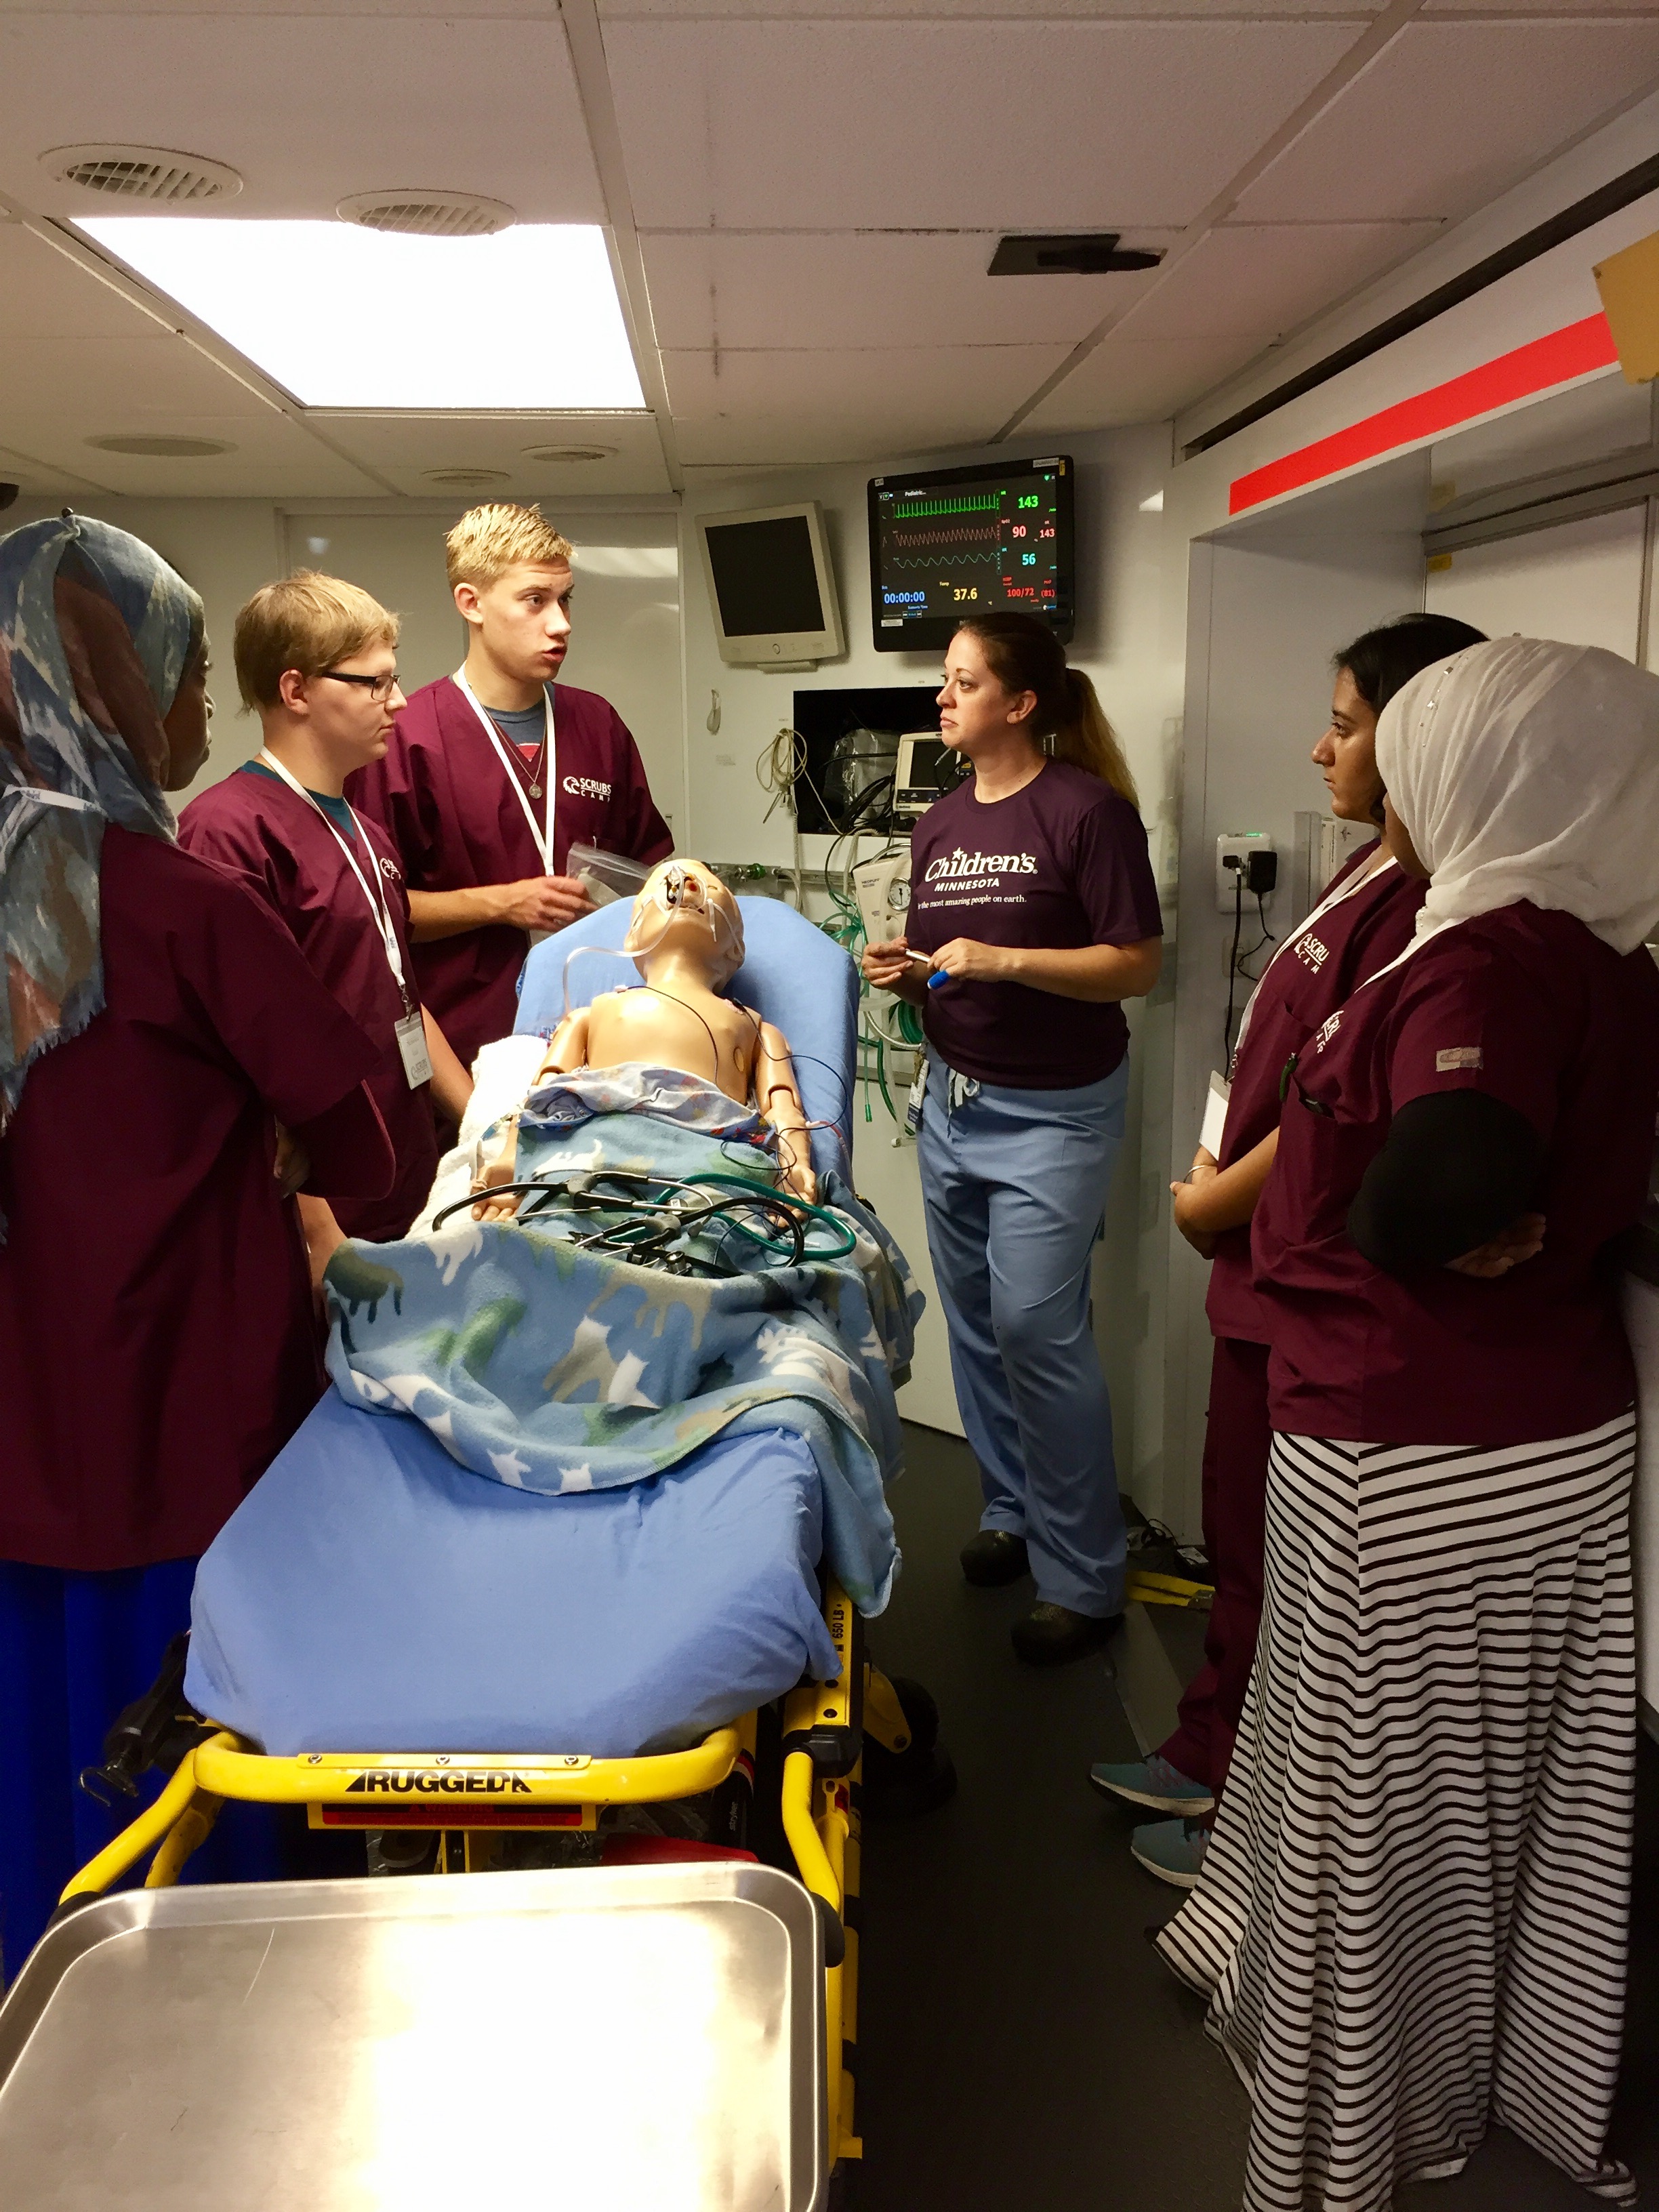   “Our doctors use this van to practice their skills, so they can deliver the best patient care possible,” said the pediatric nurse. The simulation van was equipped with a state-of-the-art mock emergency room and technology that allowed the students 